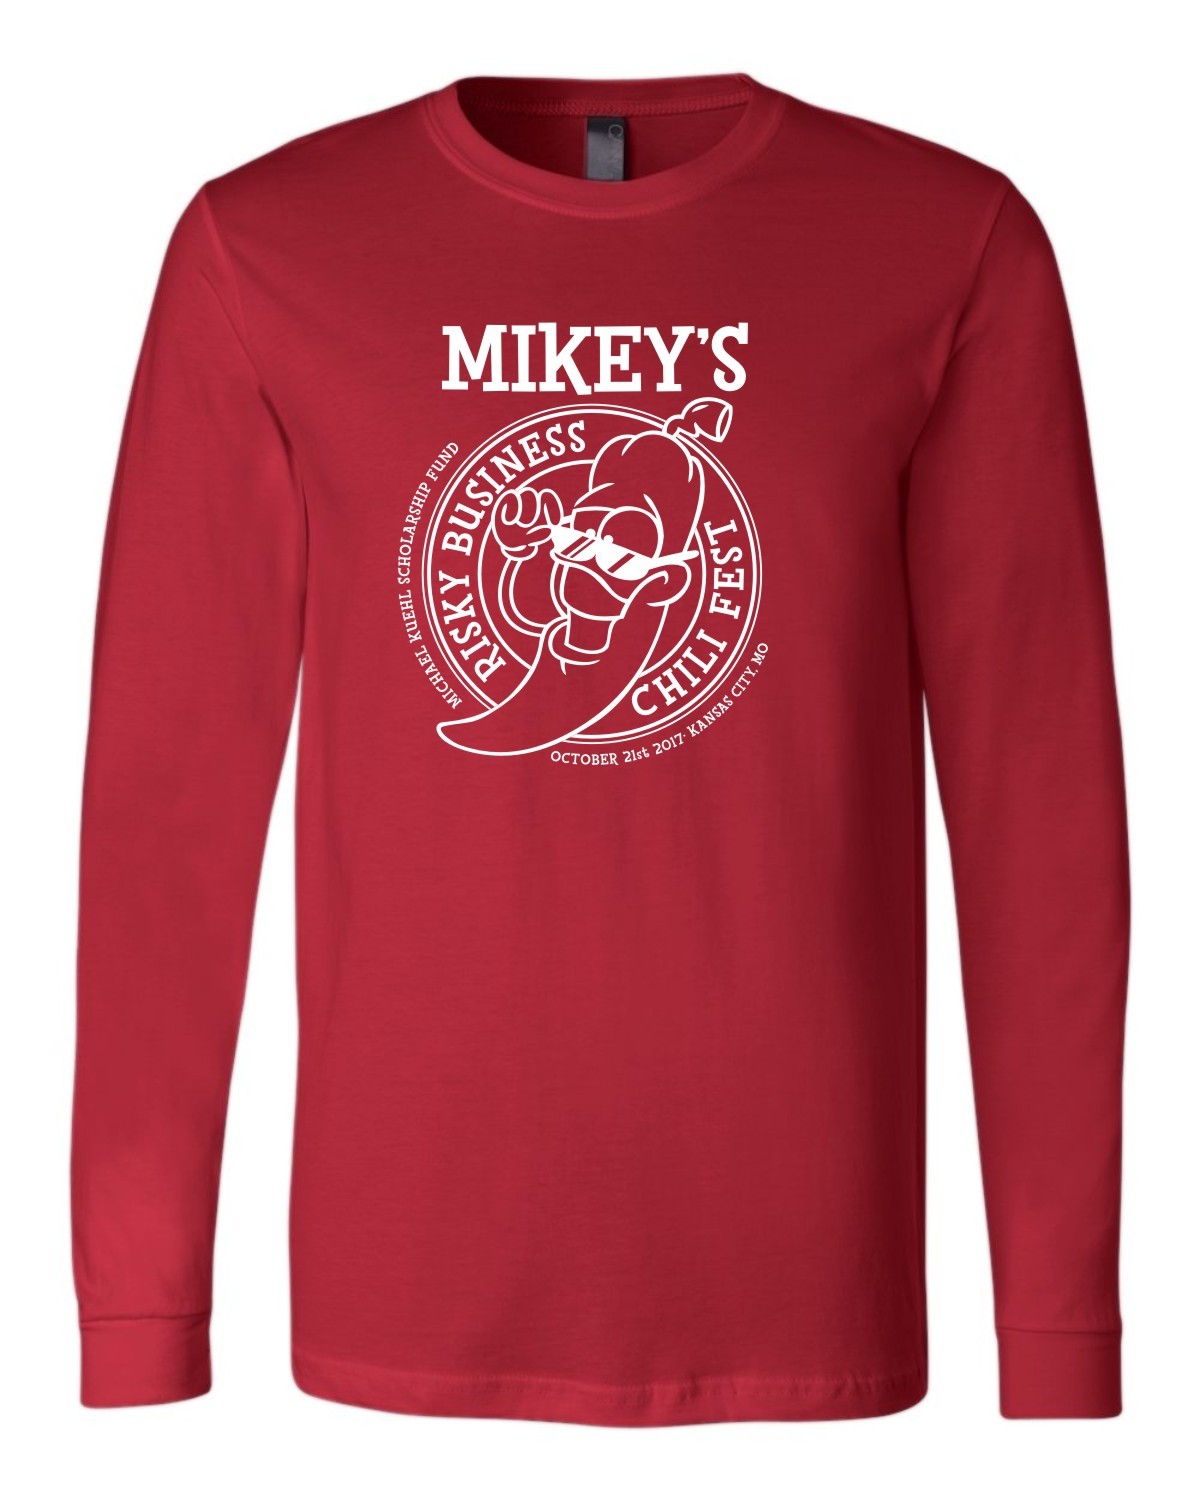 Mikey's Chili Fest 2017 02 Bella Canvas Long Sleeve t-shirt- ADULT & YOUTH 